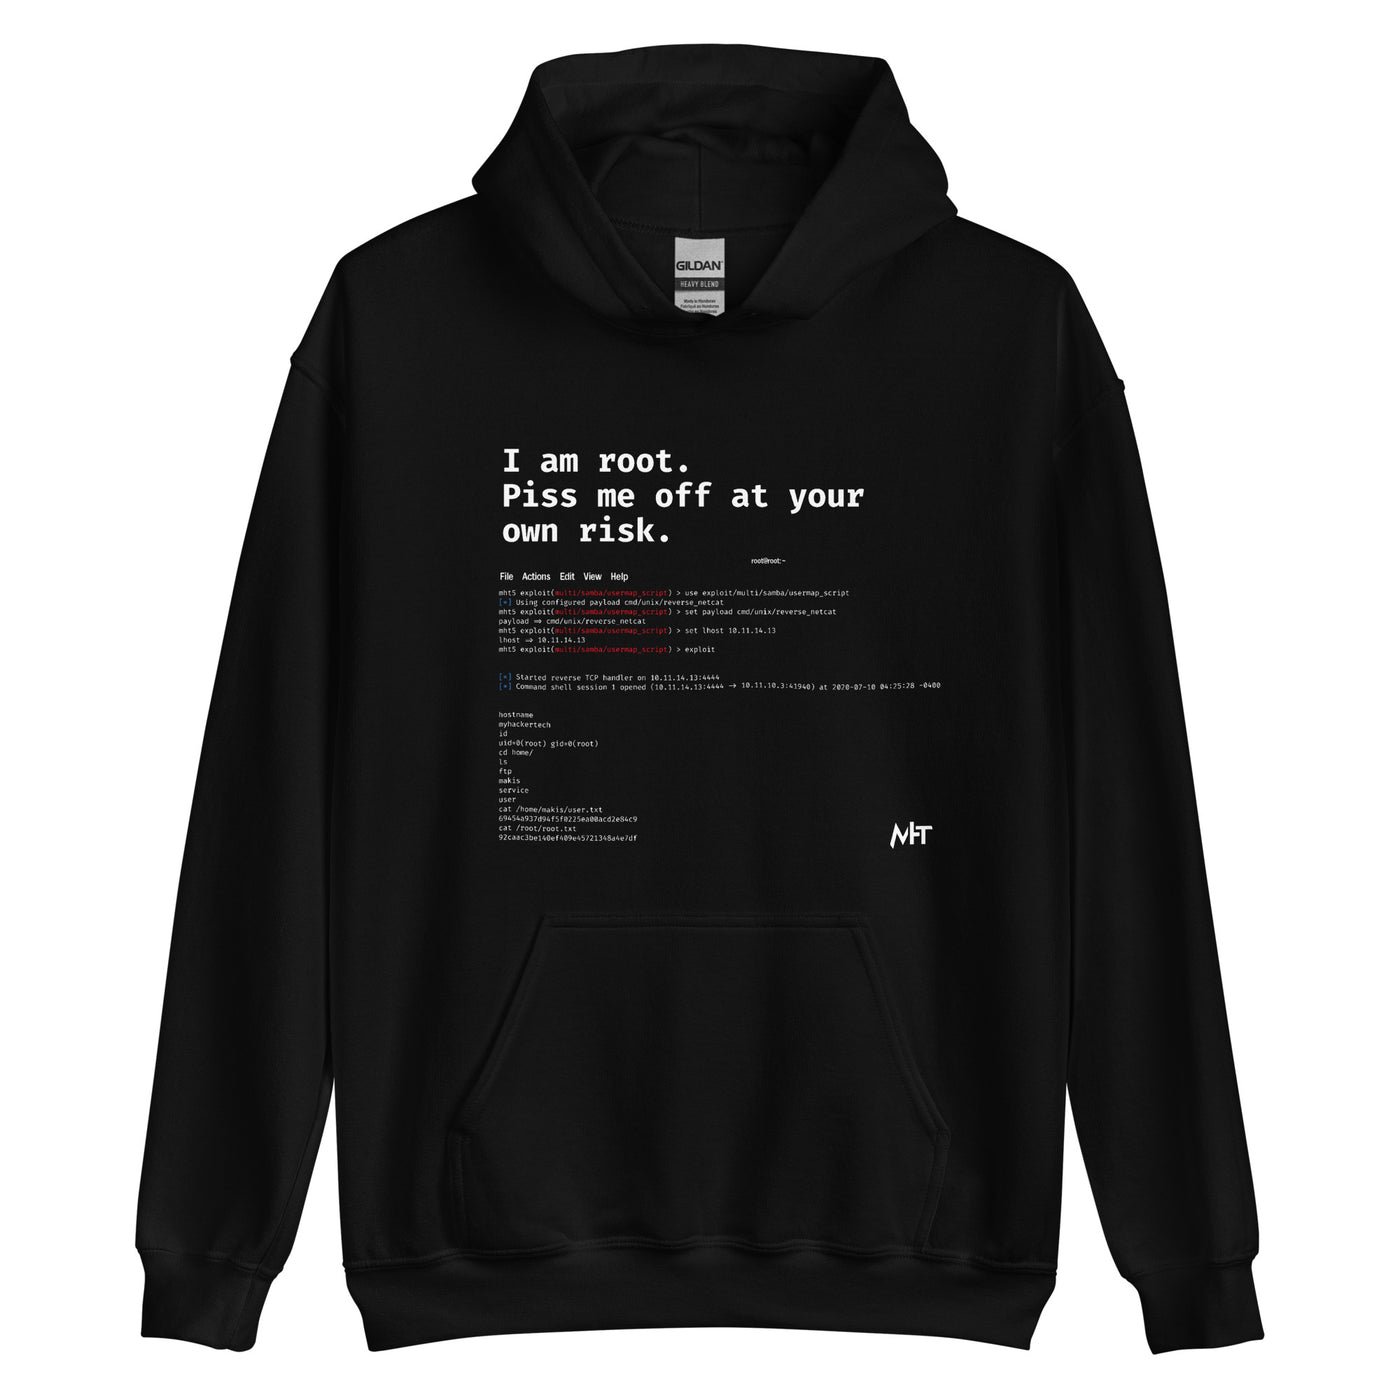 I am root. Piss me off at your own risk -Unisex Hoodie